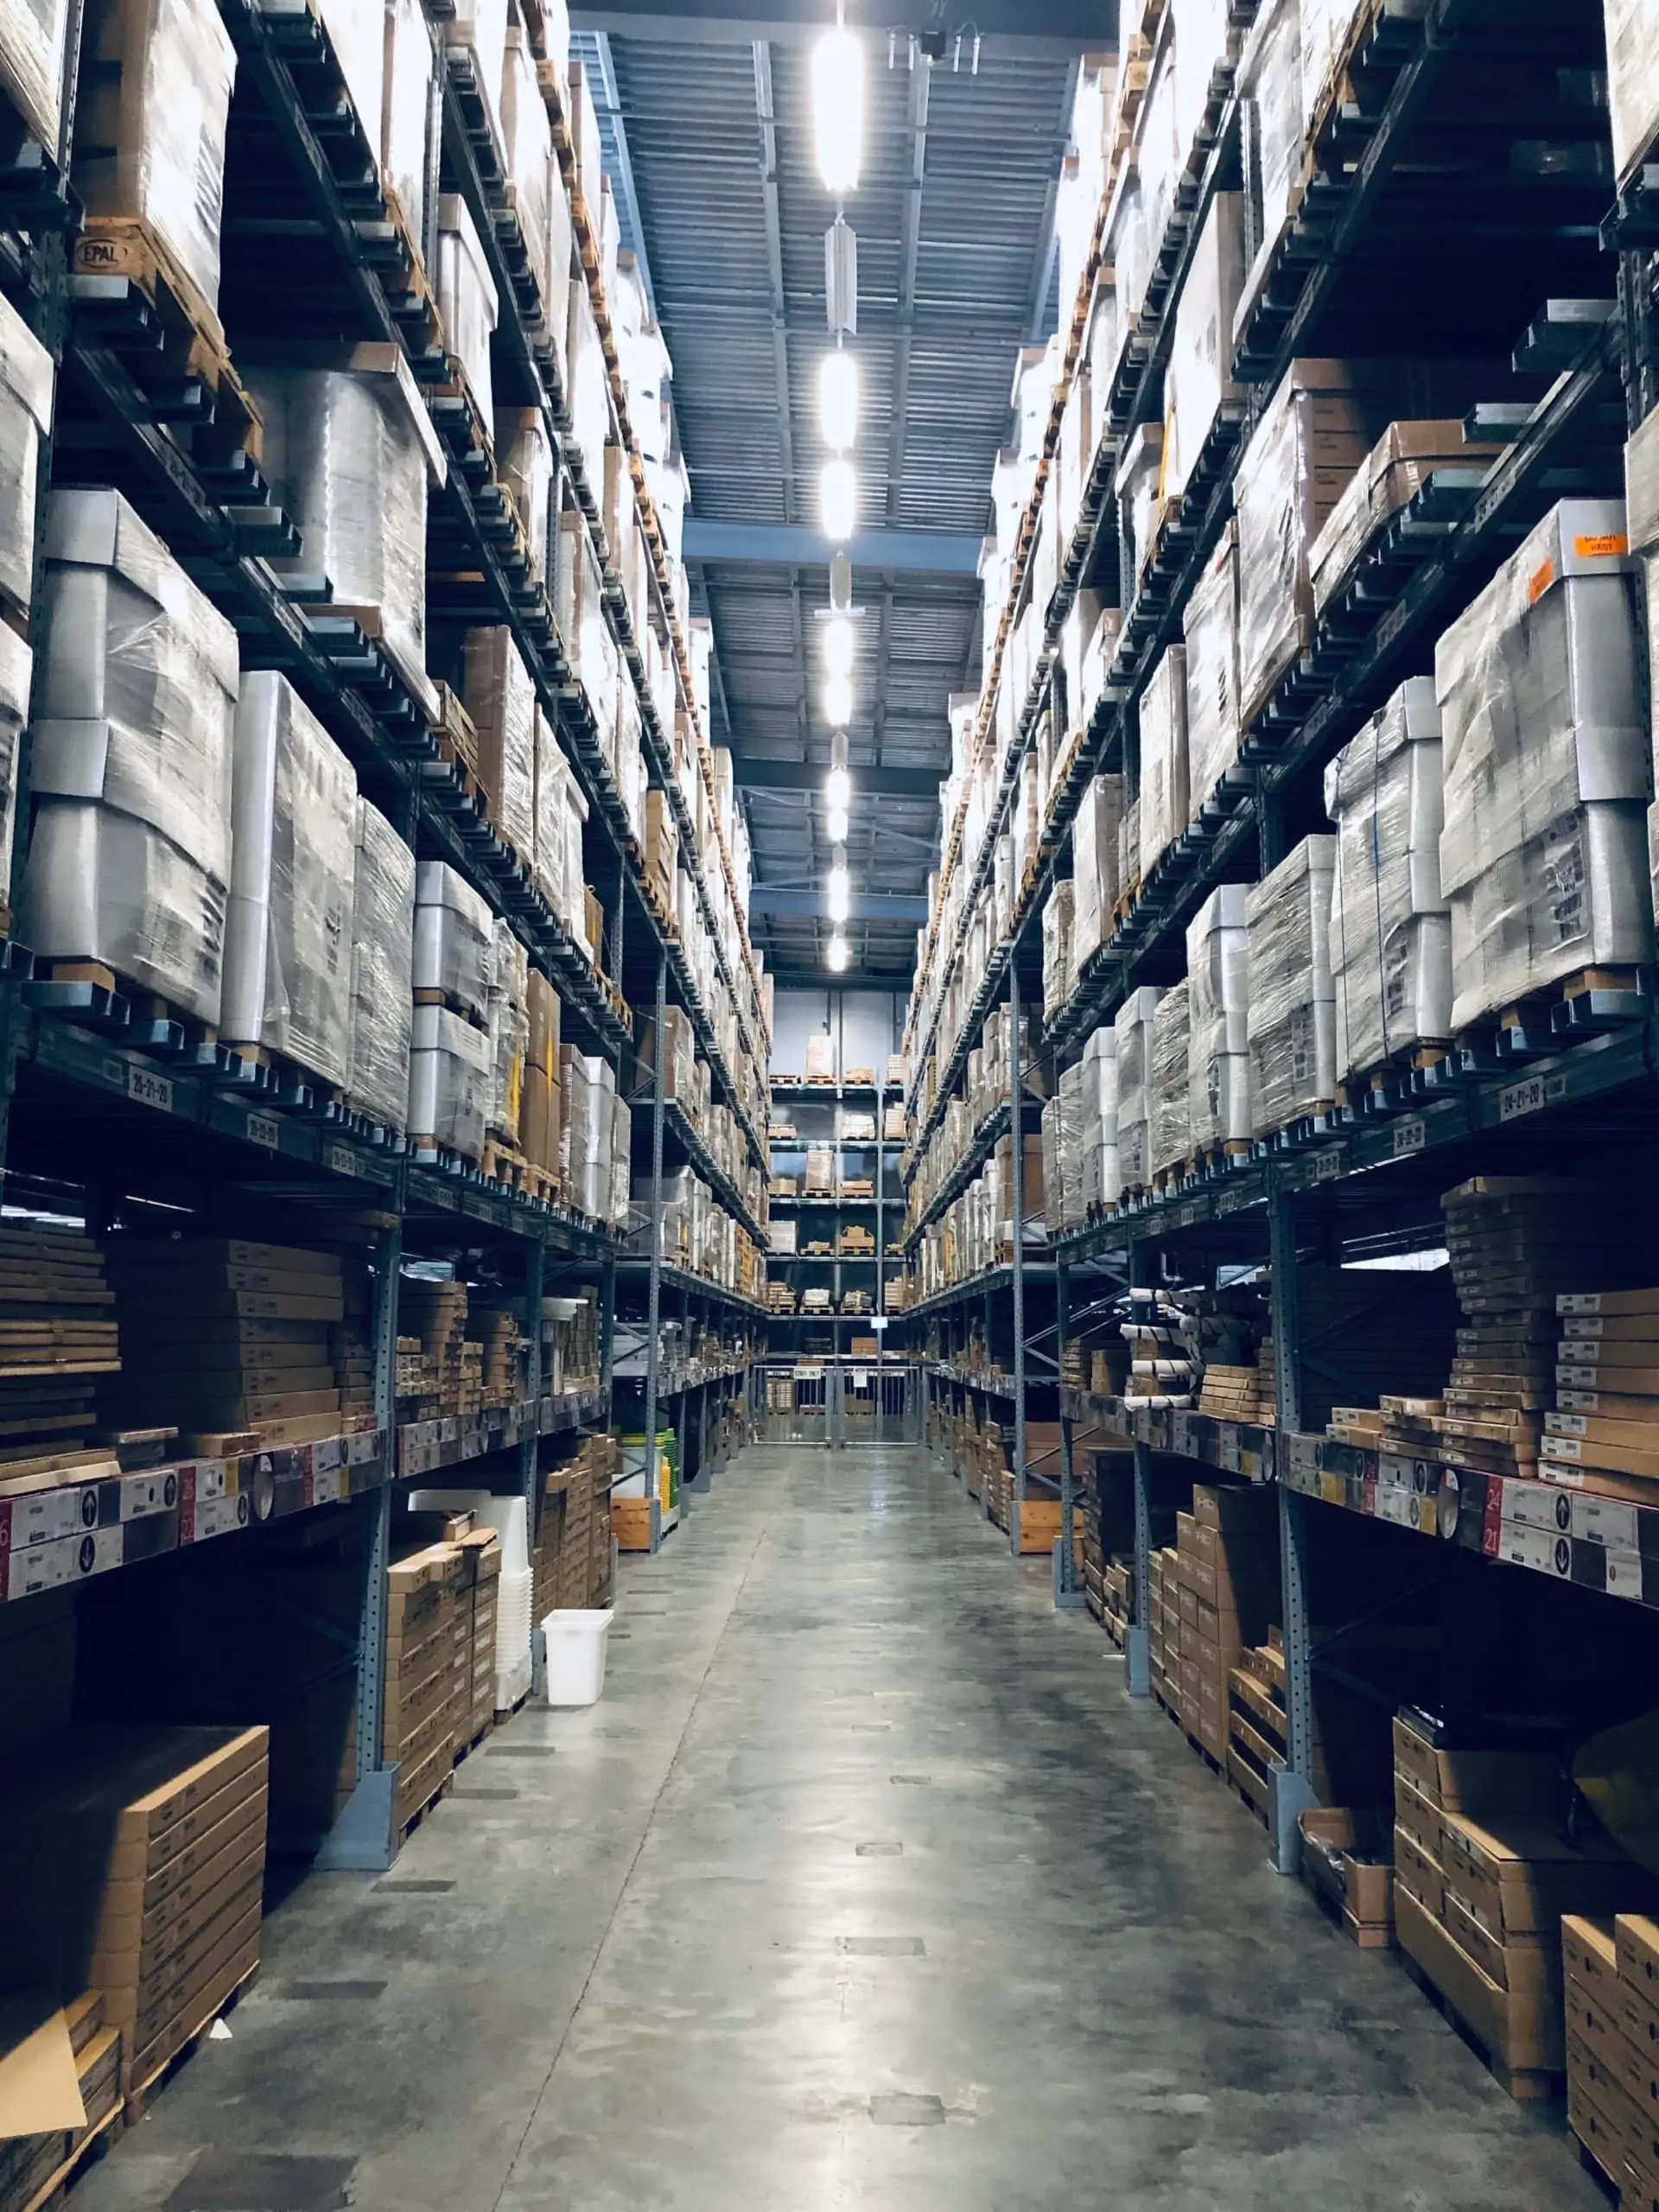 Storage area of a warehouse under surveillance with a security system